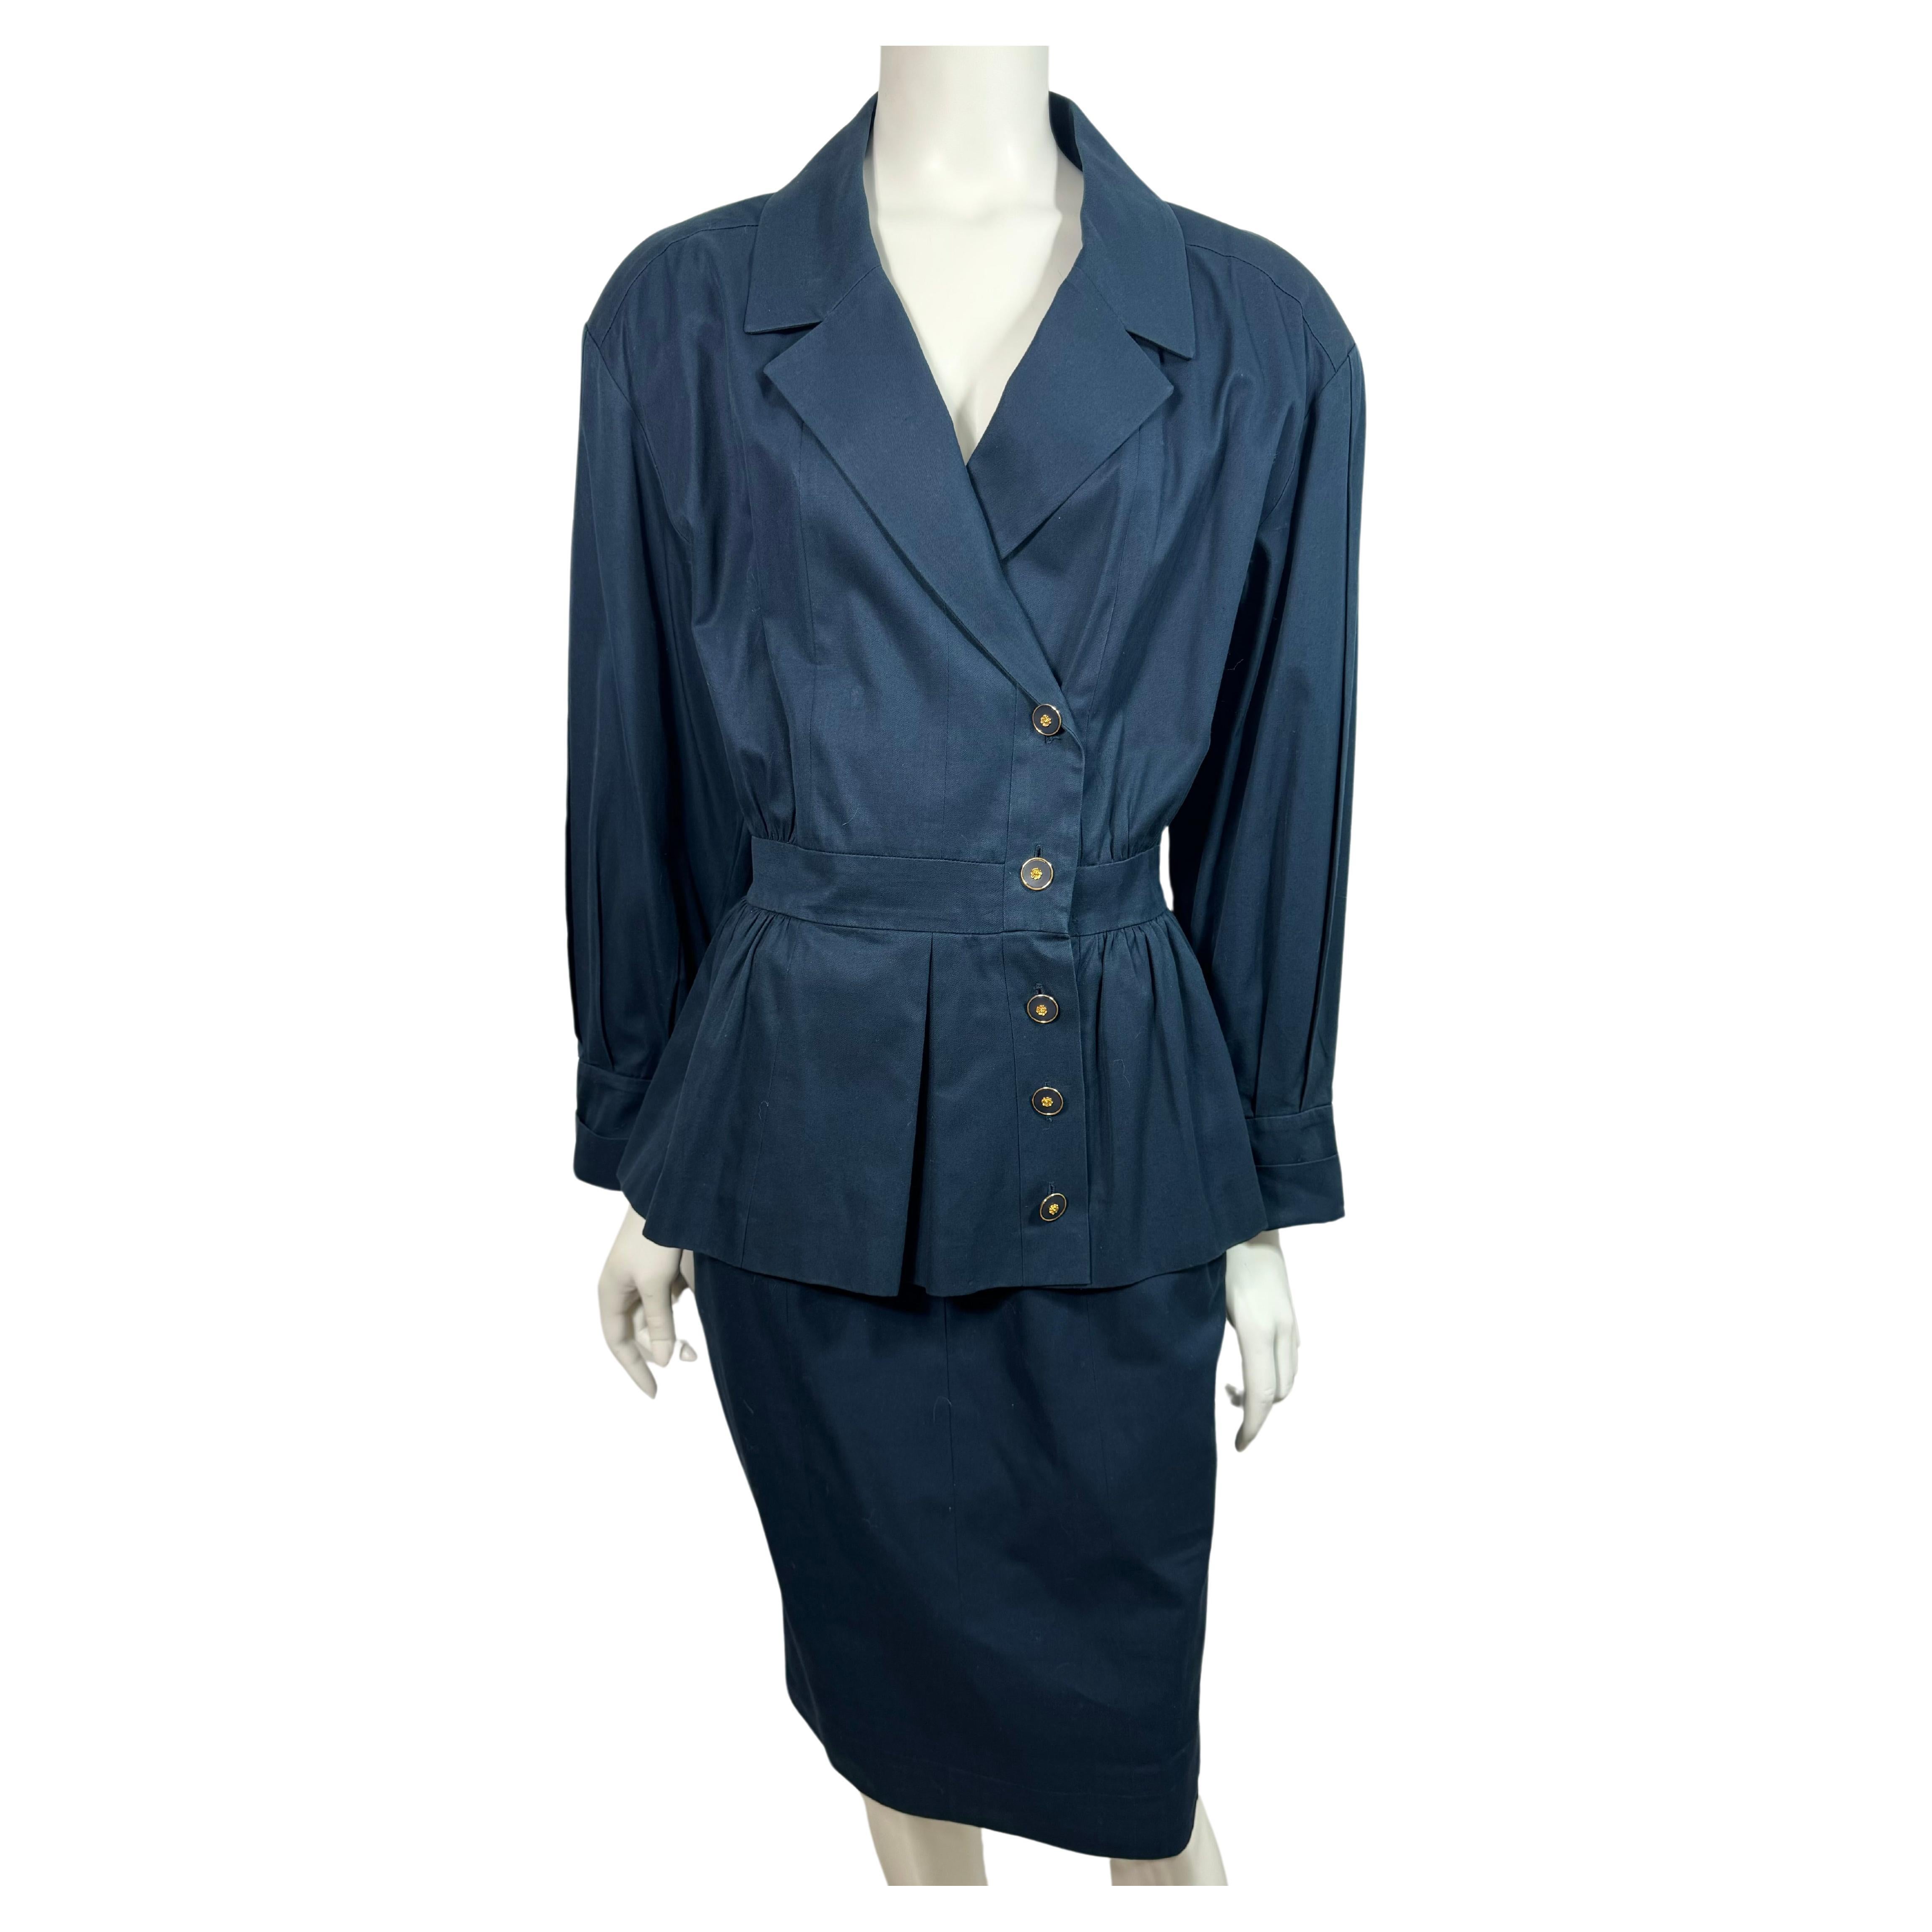 Chanel 1980's Navy Cotton Cinched Waist Jacket Skirt Suit - Size 38 For Sale